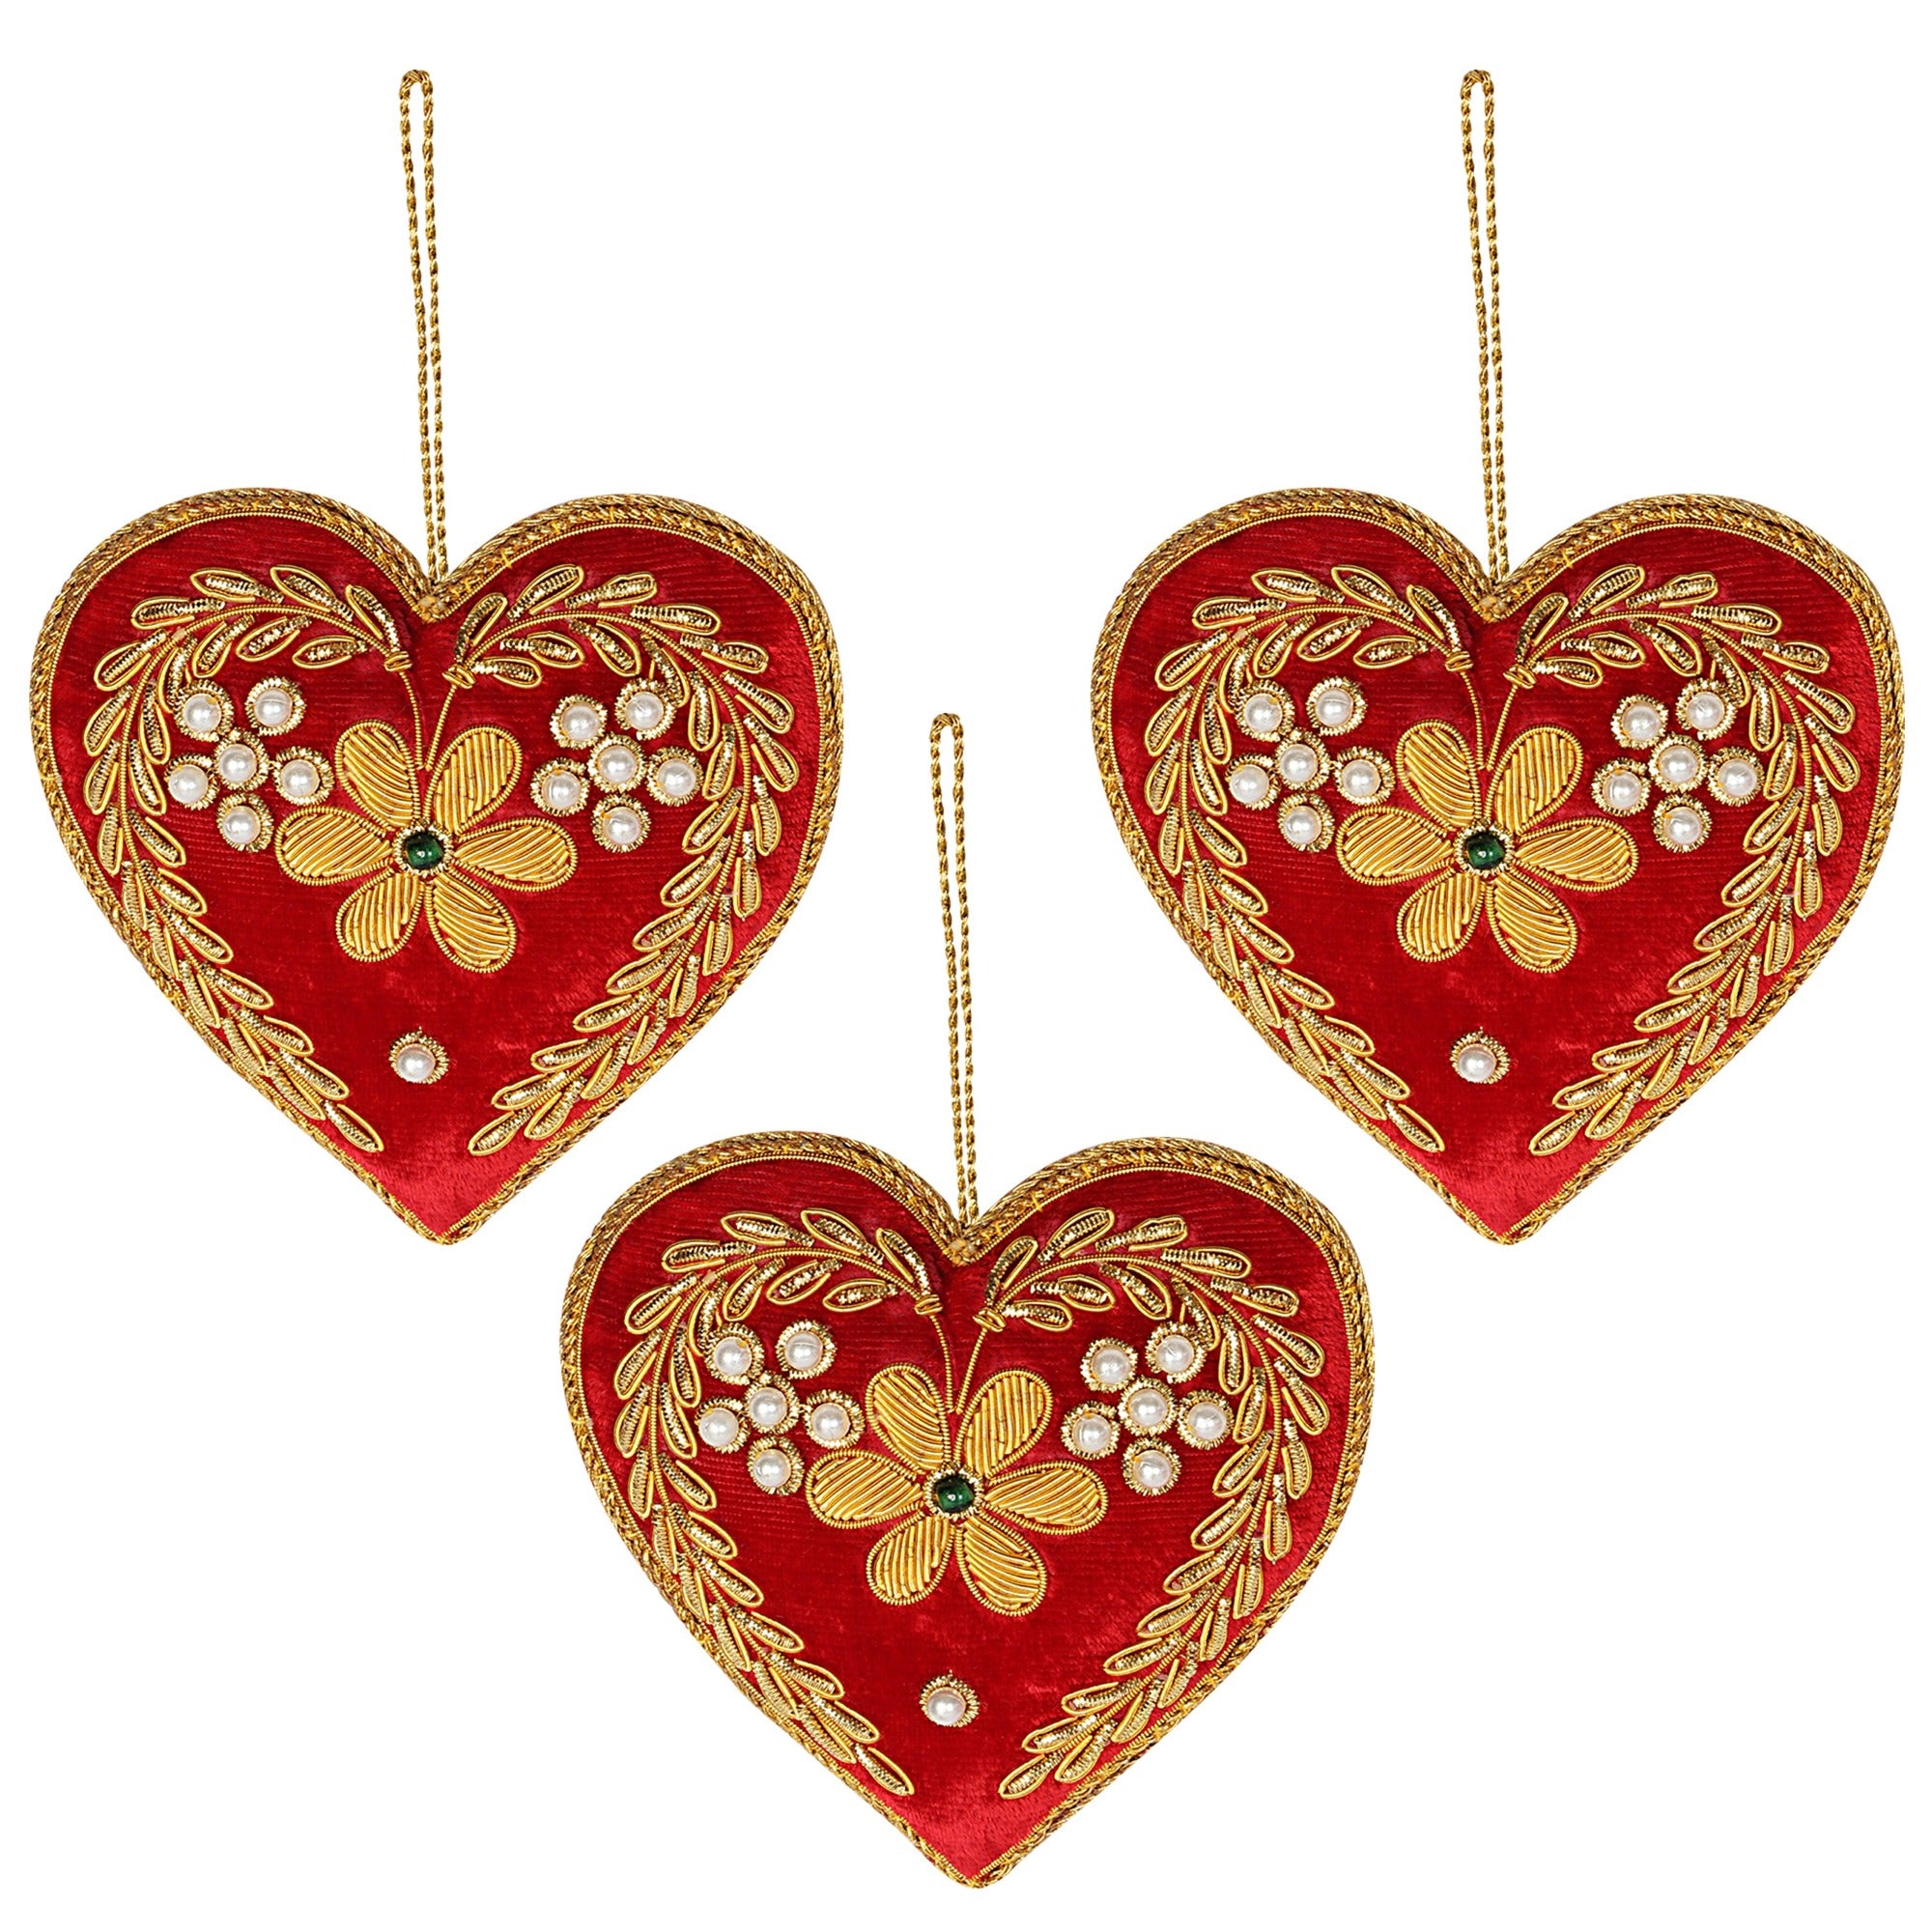 Holiday Hearts Red Christmas ornaments set of 3 pieces for holiday decor (1SET=3PC)